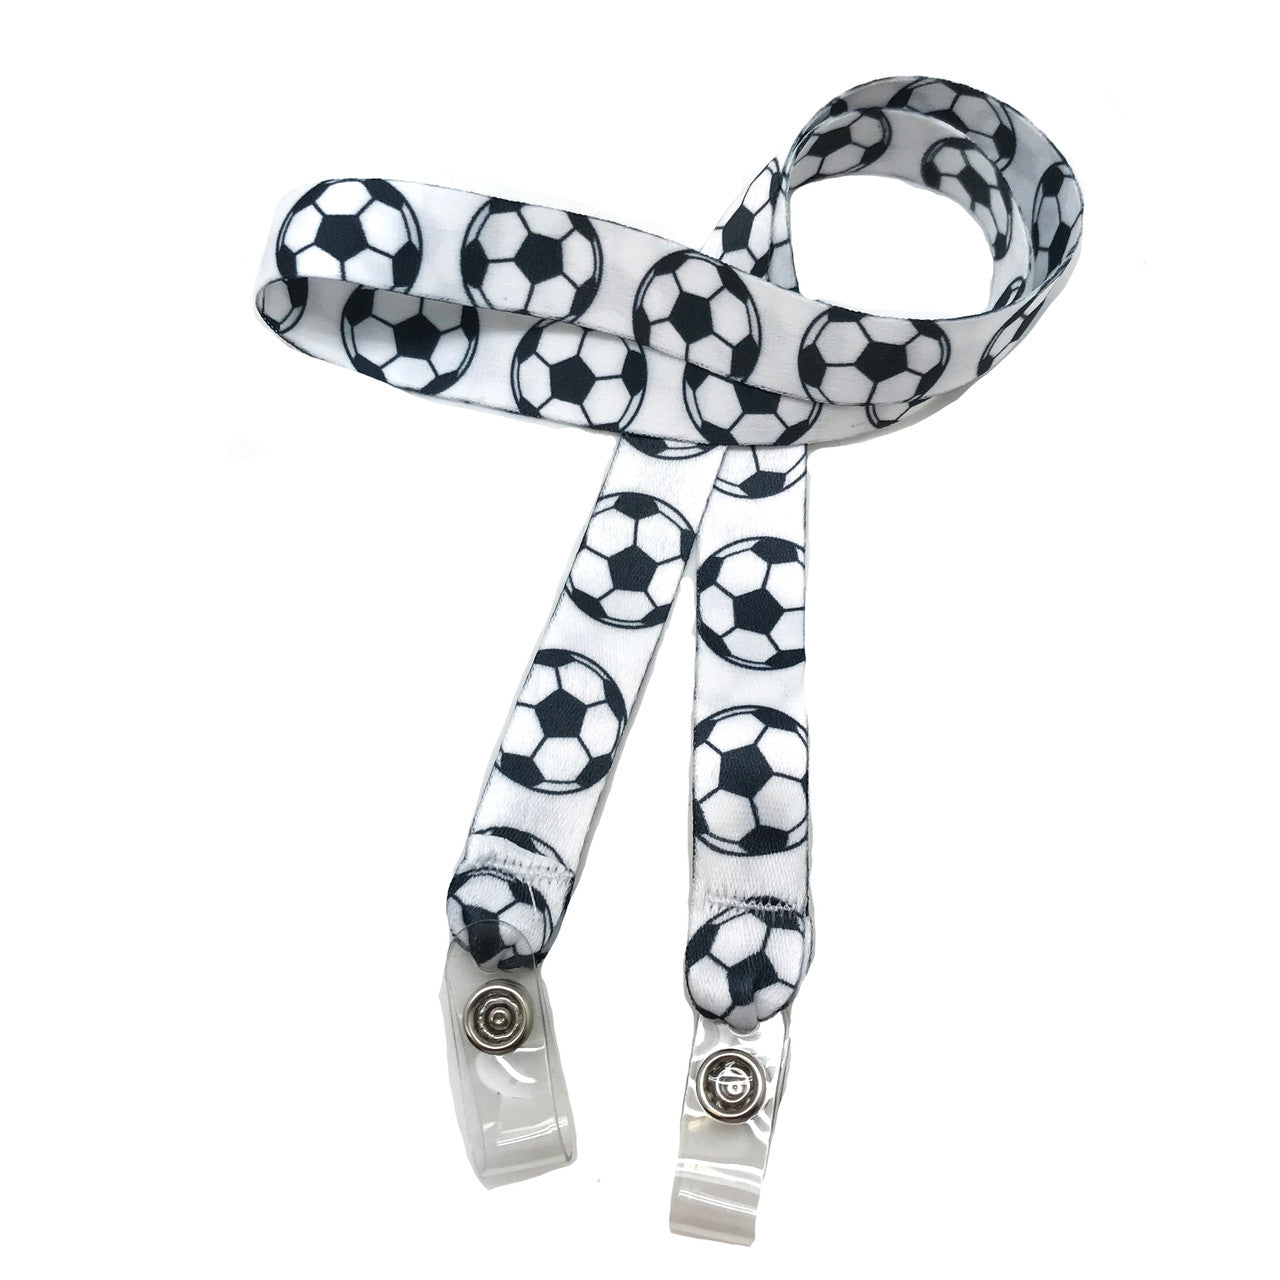 24" mask holder with soft plastic snap closures printed with a soccer ball design printed on both sides on  5/8" Ultra Lanyard material are perfect for children and adults for keeping track of face masks at school, sports practice, lunch and break time.